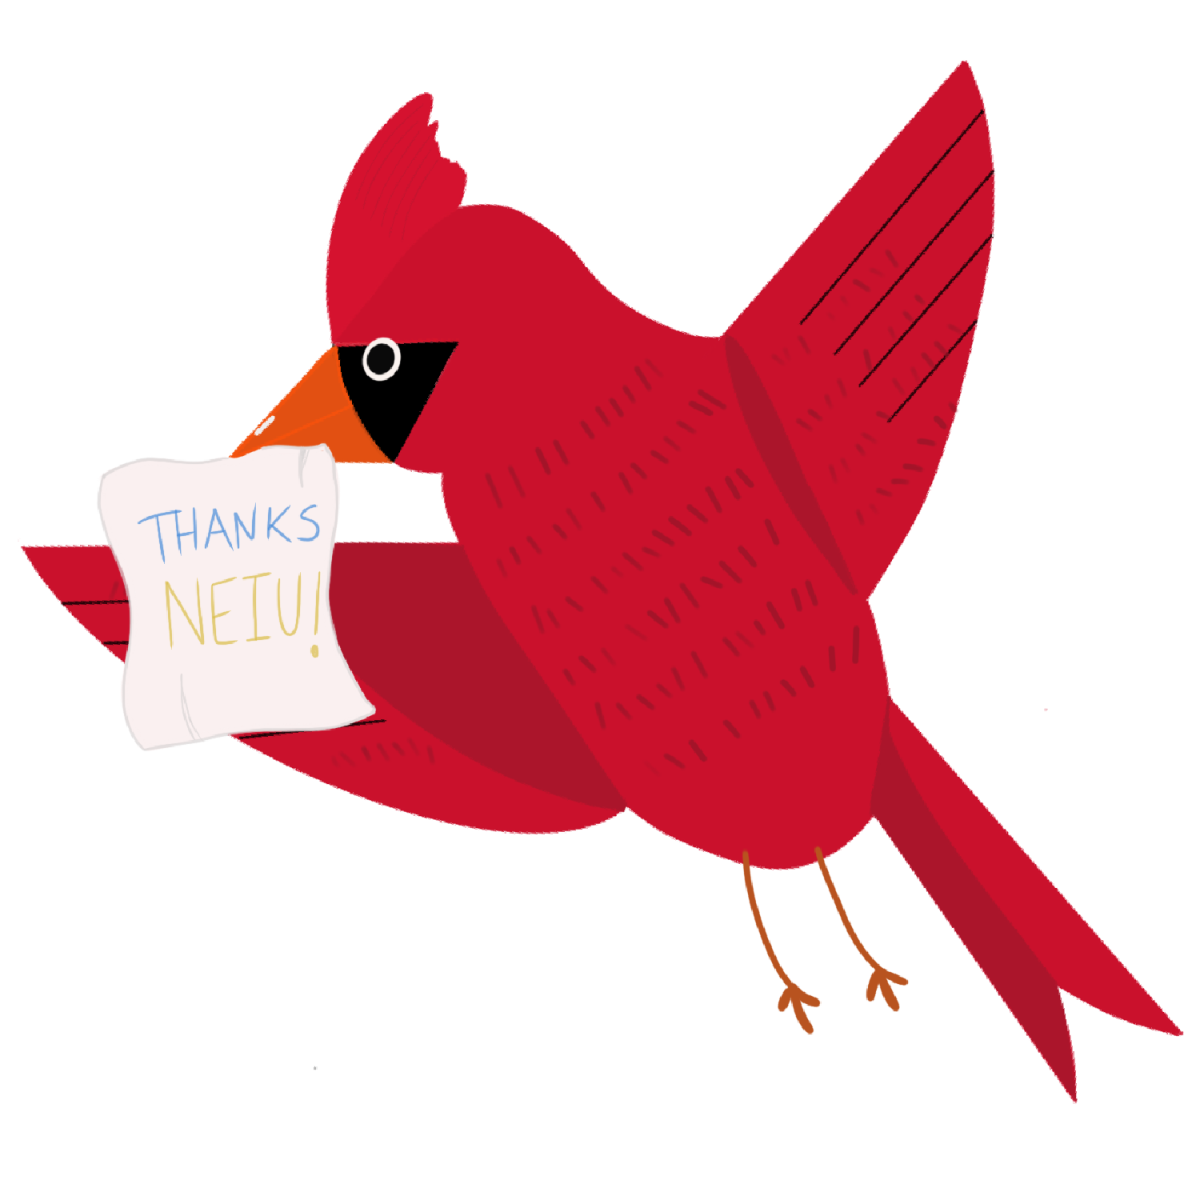 Illustrated an image of a robin holding a note that says Thank you to NEIU